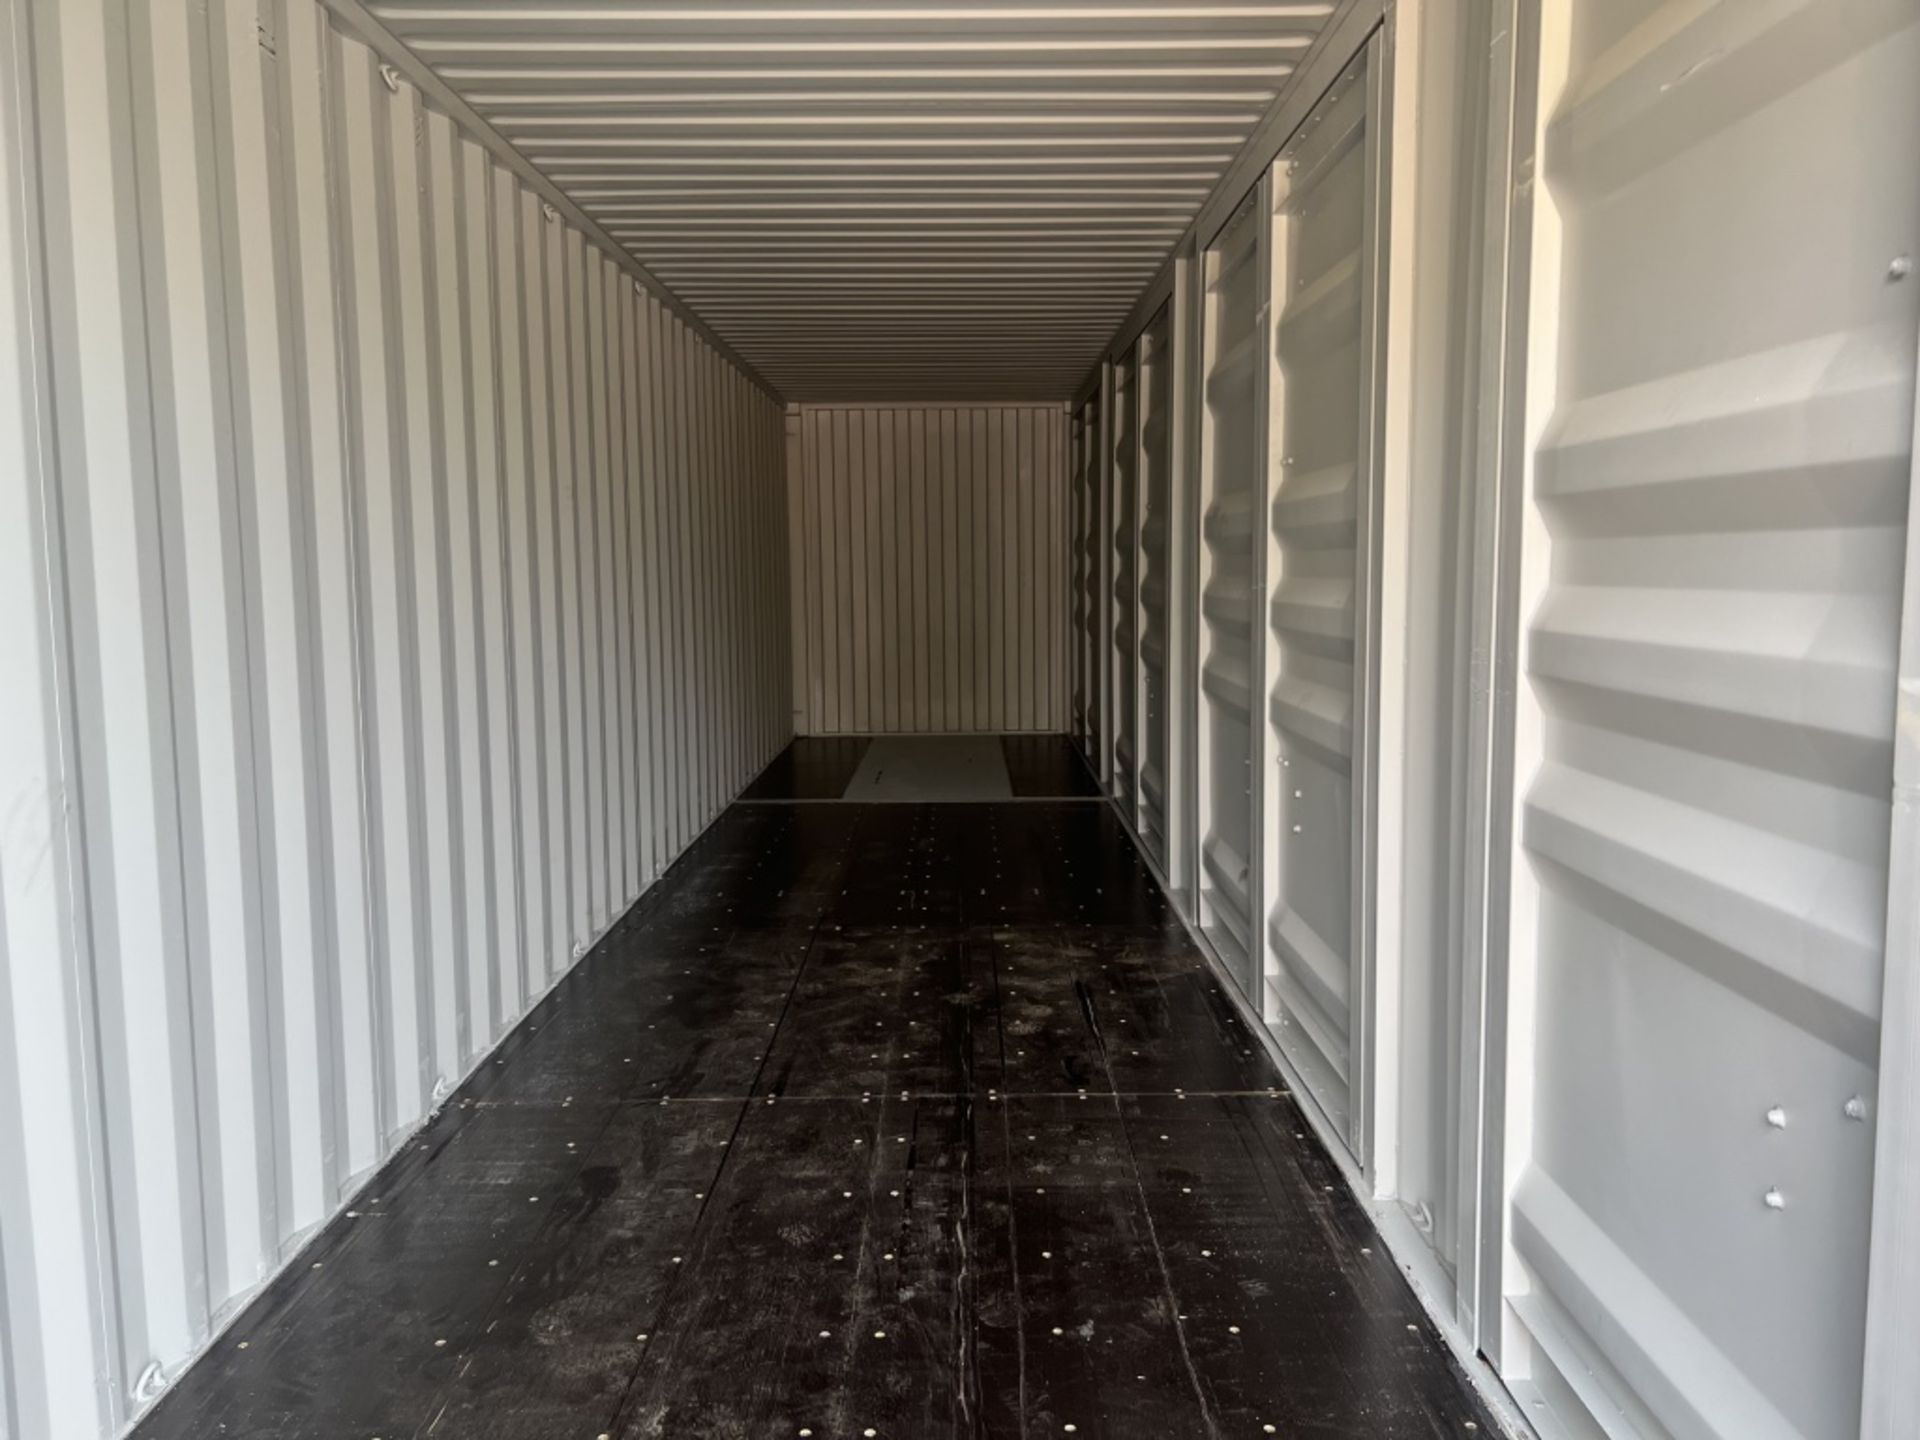 2022 40' High Cube Shipping Container - Image 10 of 10